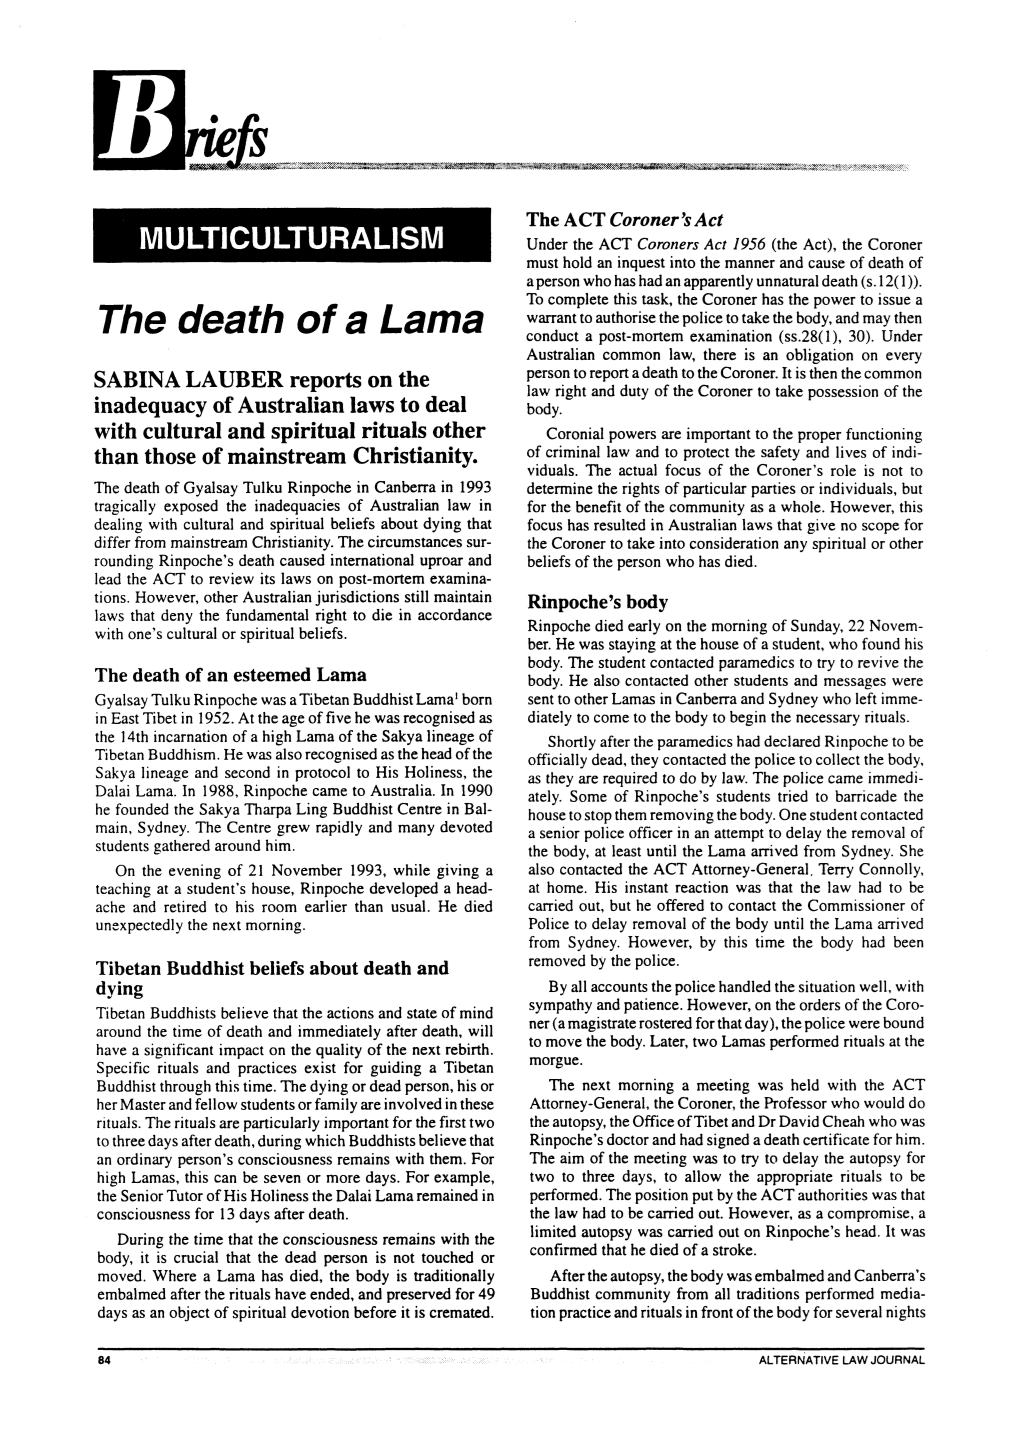 The Death of a Lama Conduct a Post-Mortem Examination (Ss.28(L), 30)